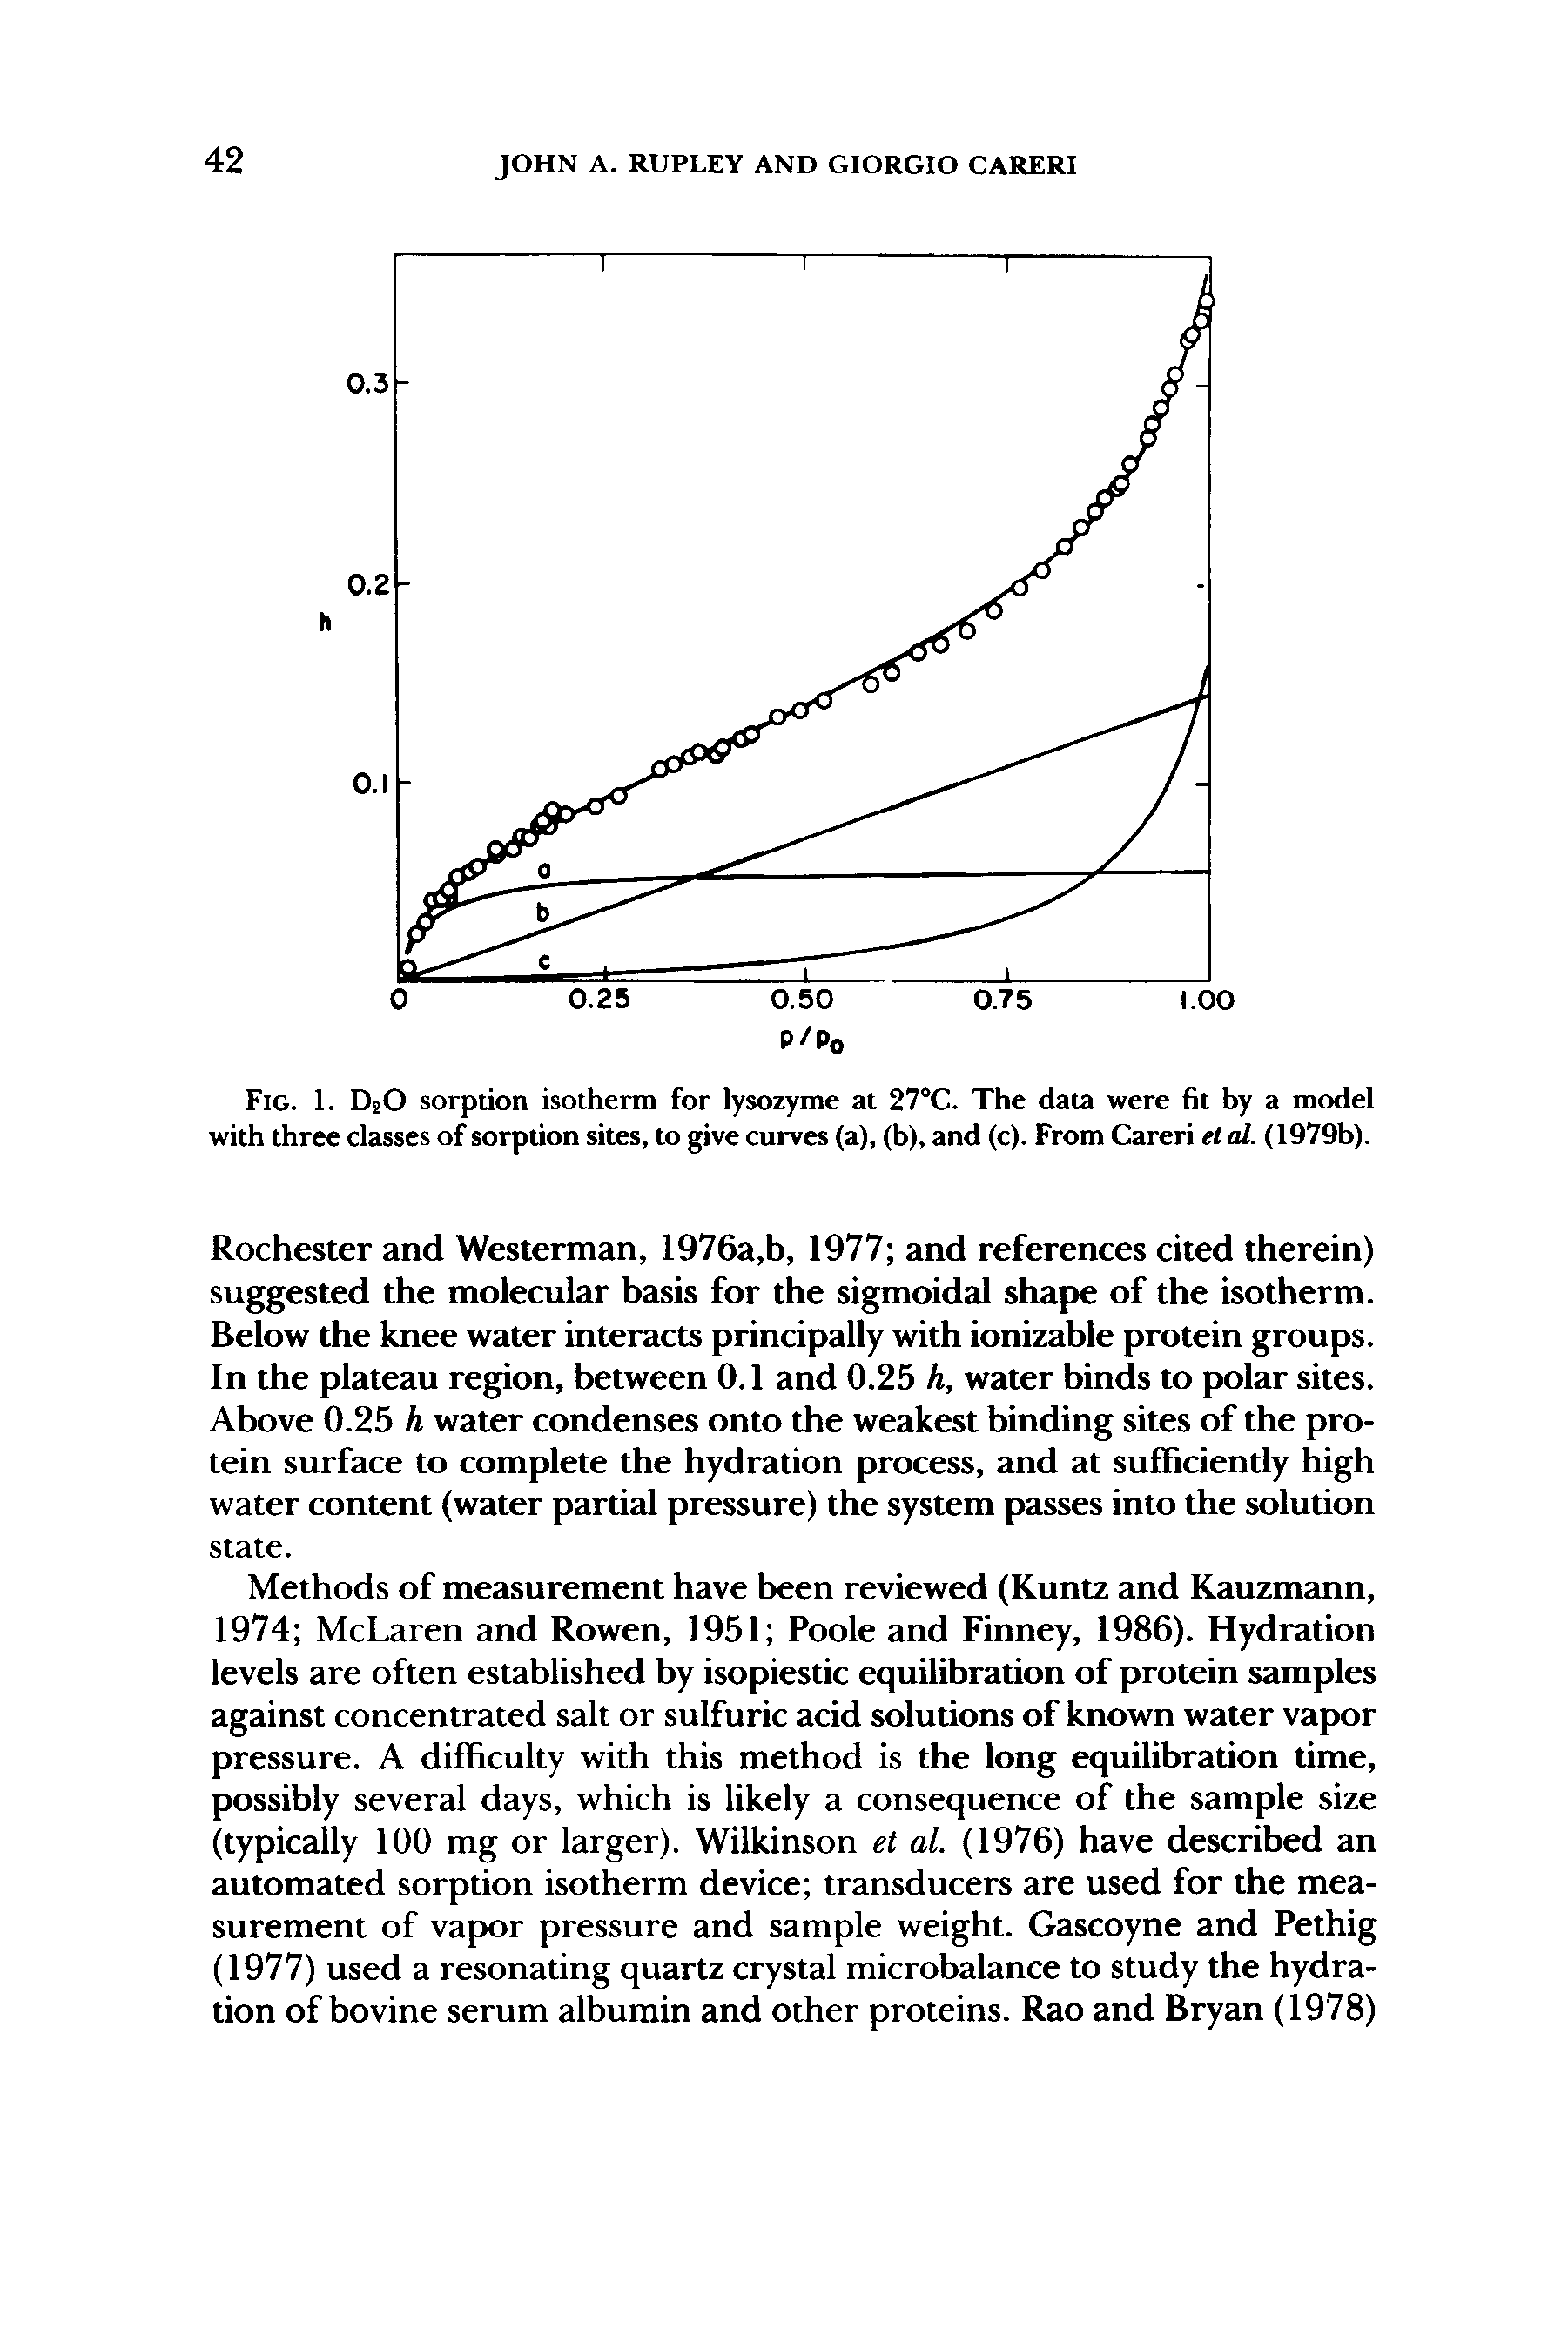 Fig. 1. DjO sorption isotherm for lysozyme at 27°C. The data were fit by a model with three classes of sorption sites, to give curves (a), (b), and (c). From Careri el al. (1979b).